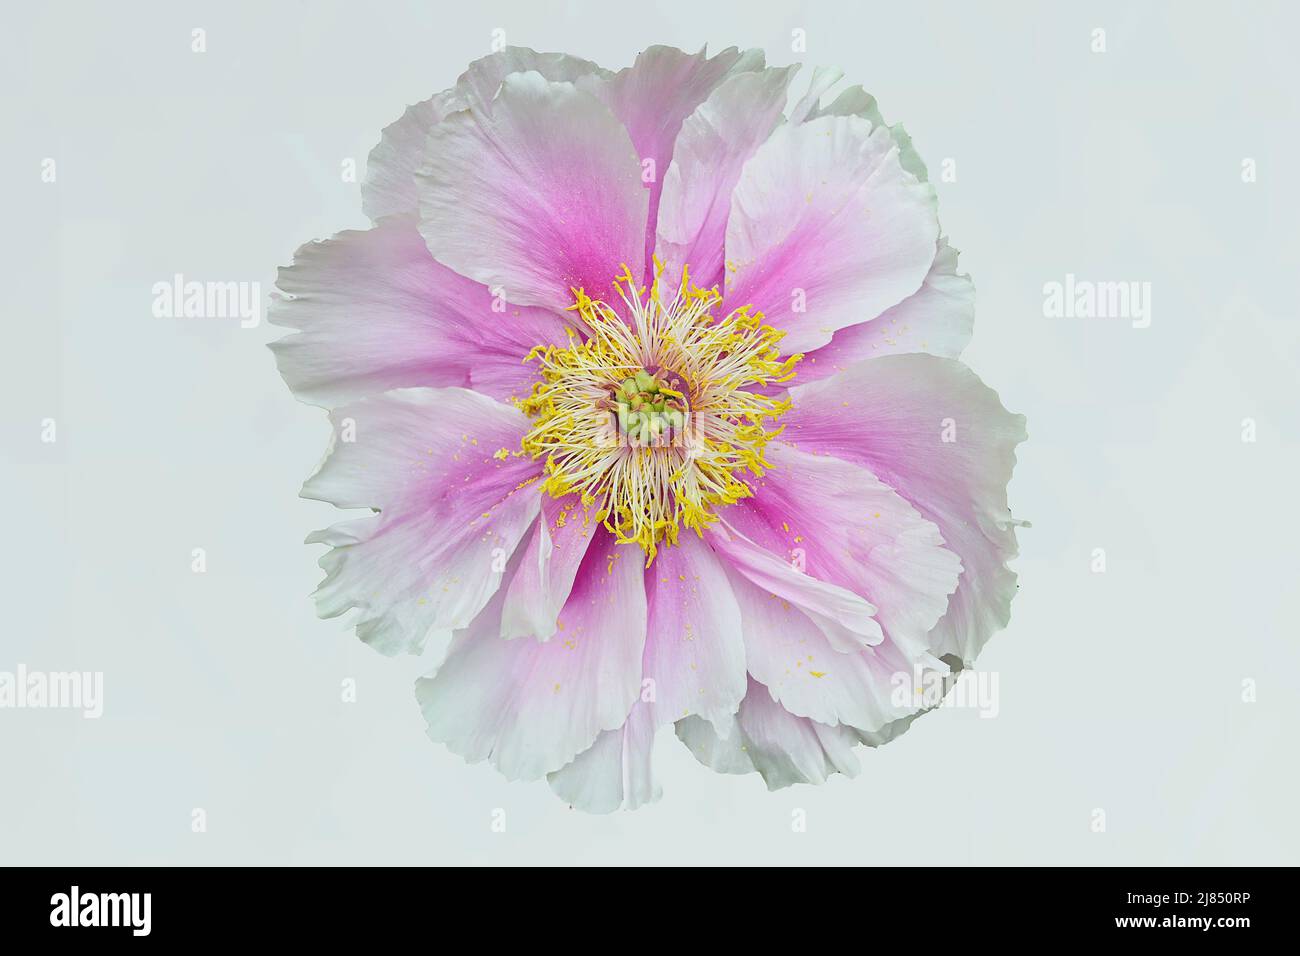 The peony or paeony is a flowering plant native to Asia, Europe and Western North America. With 33 known species, most are herbaceous perennials with Stock Photo